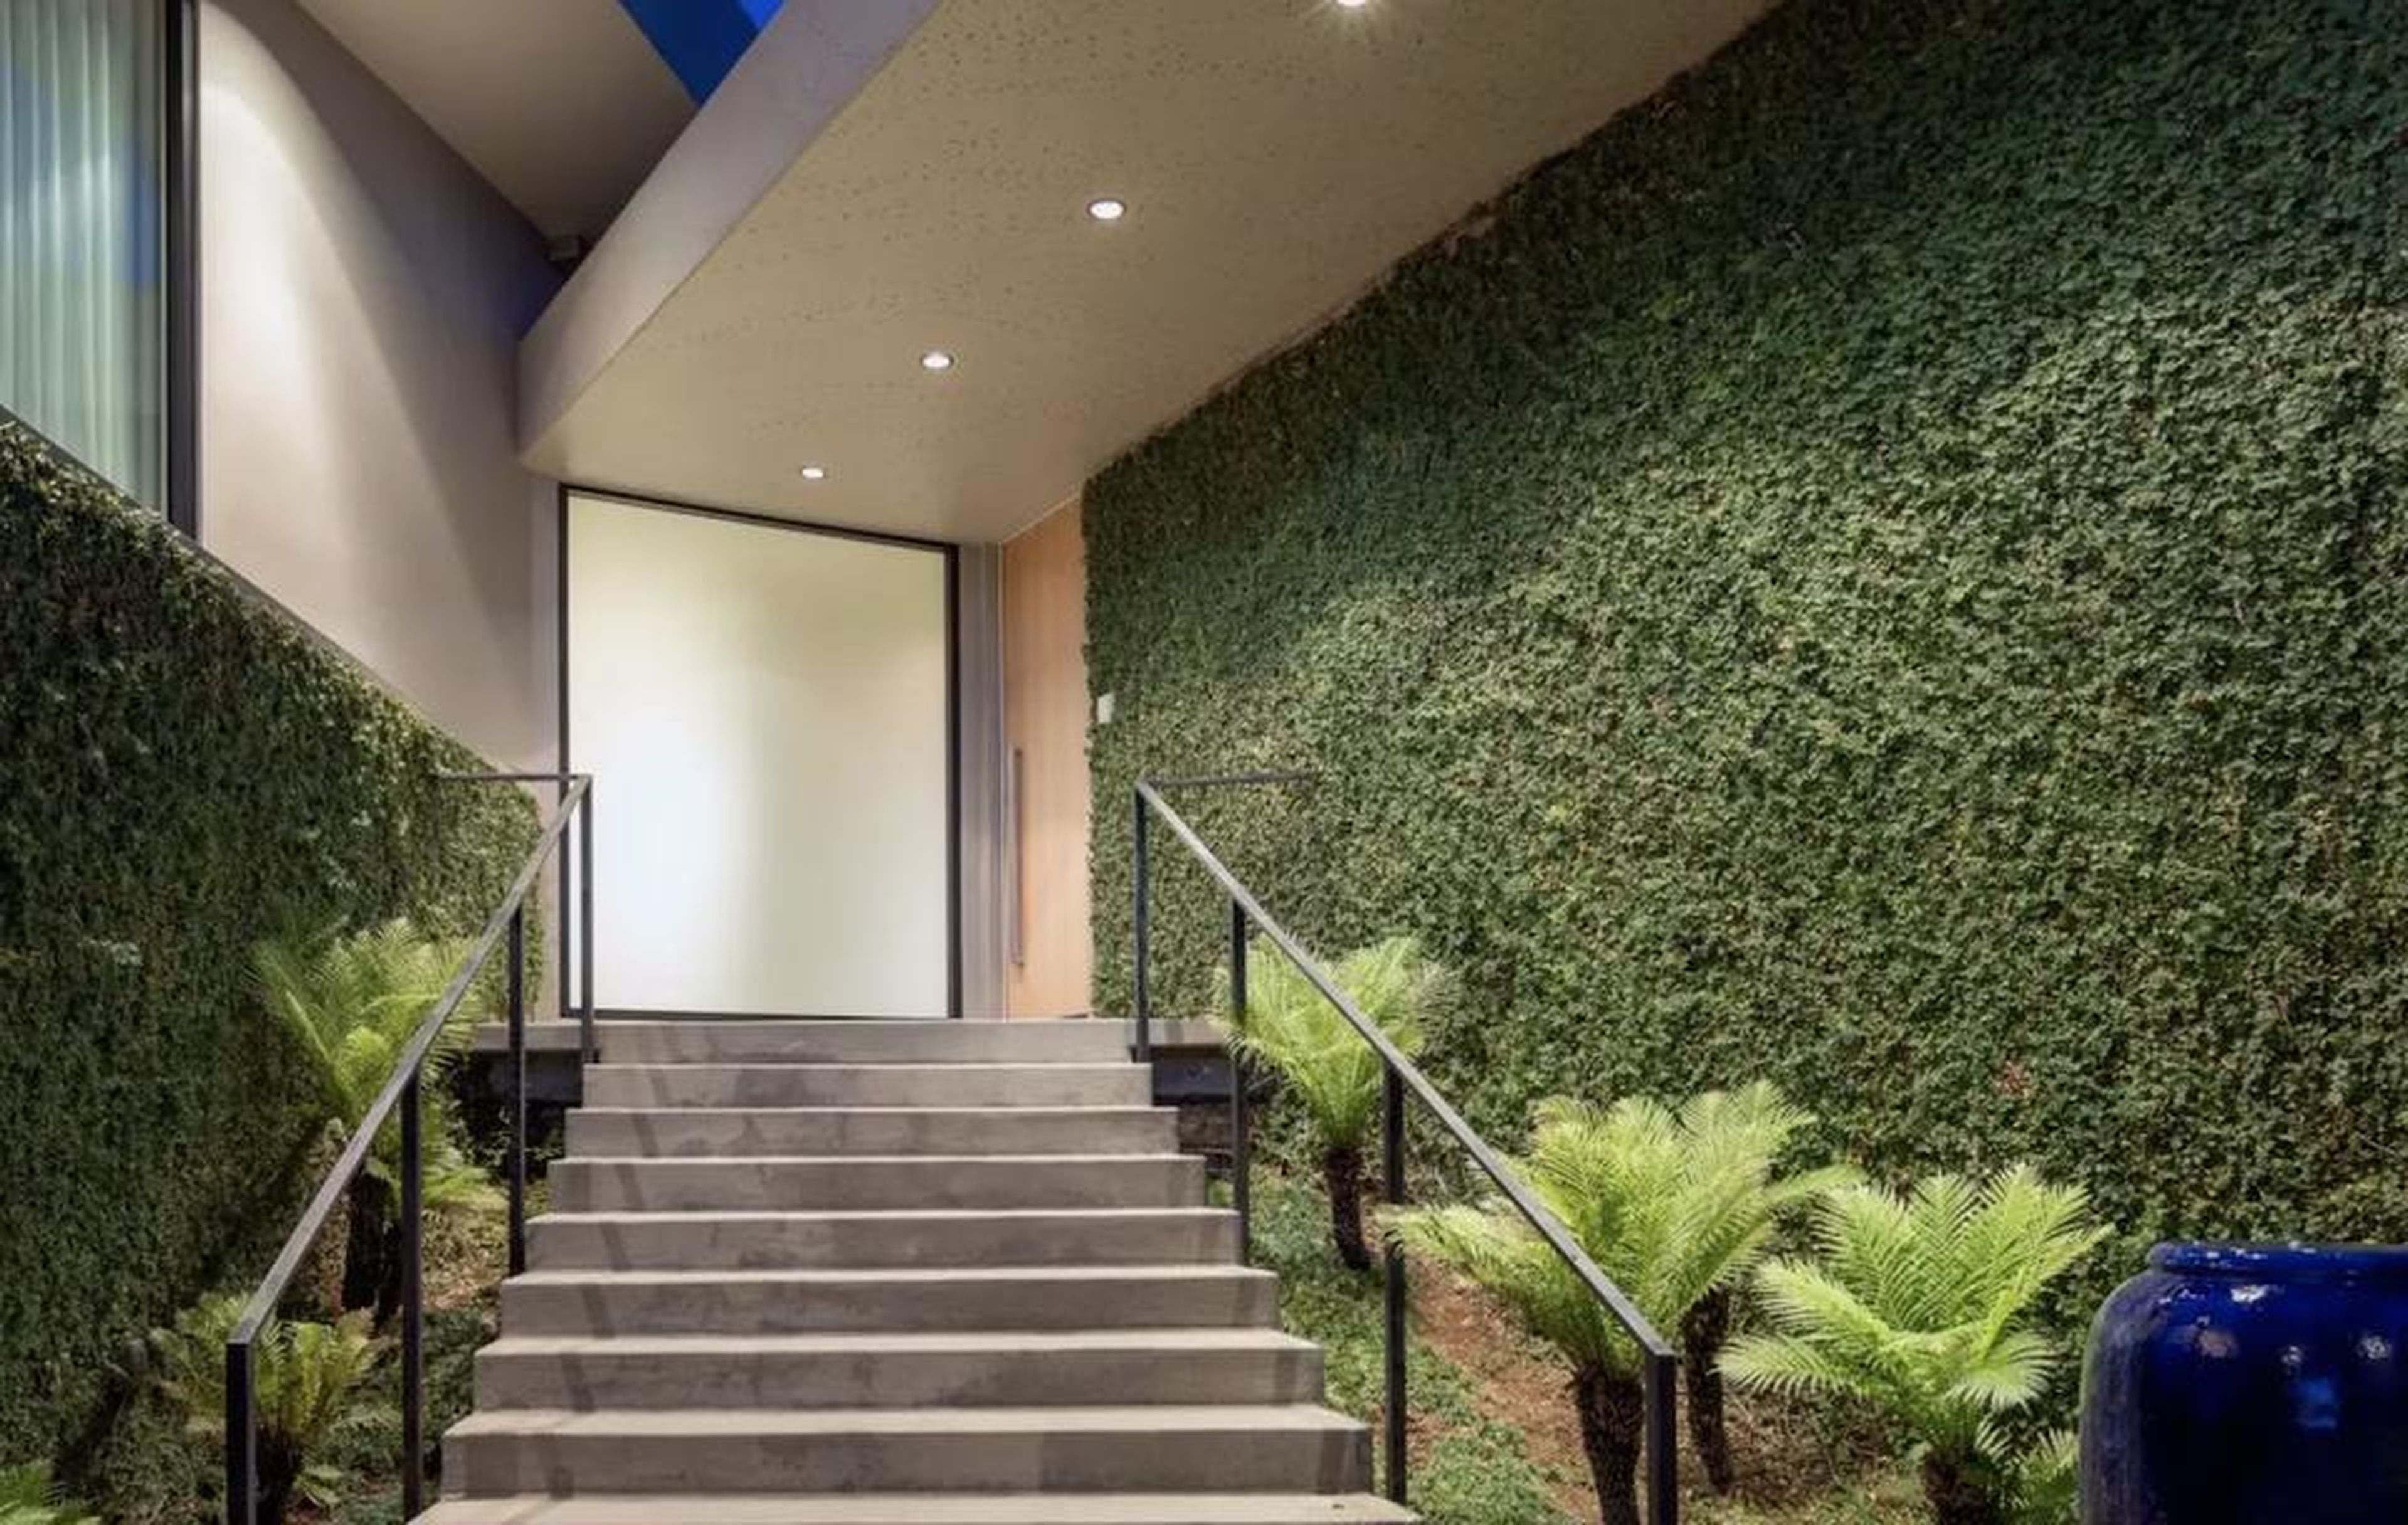 Large privacy hedges help the home stay secluded despite how close it is to the street.